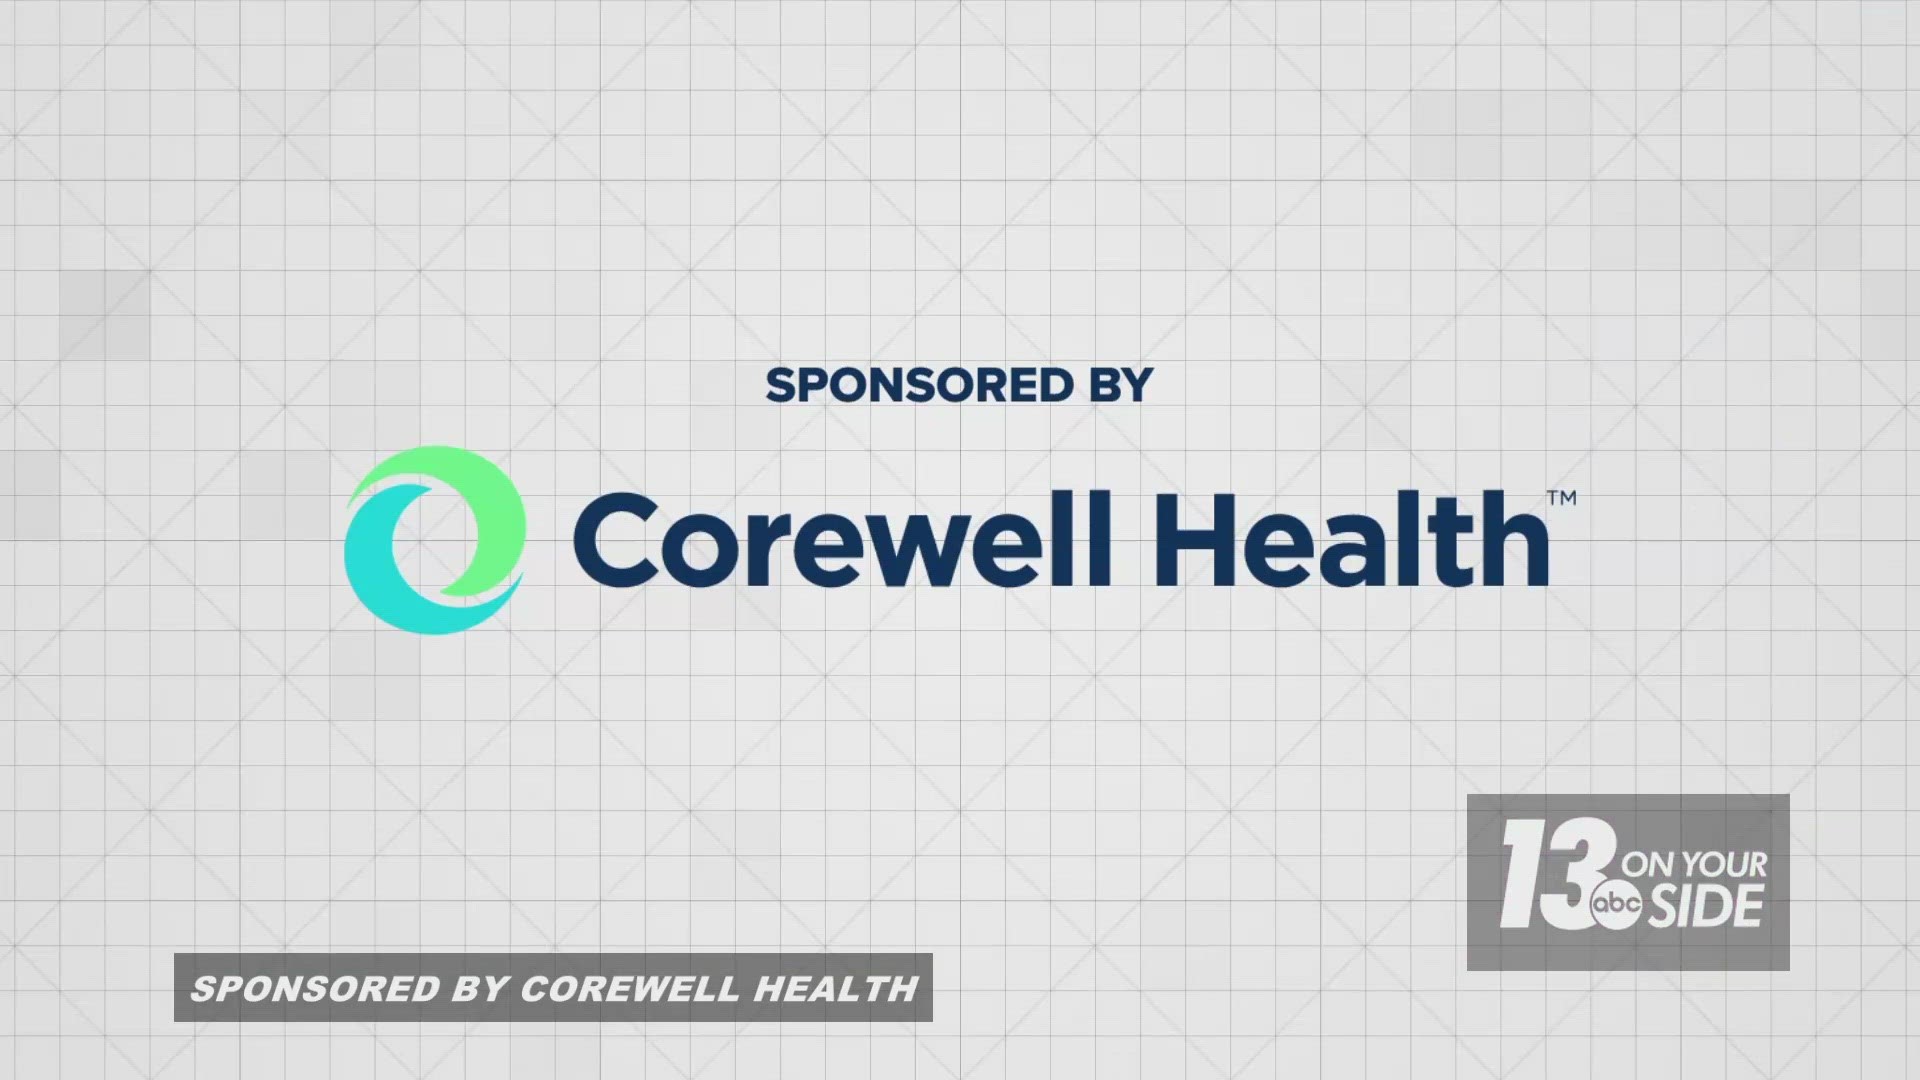 Corewell Health, formerly Spectrum Health, has long provided medical care along the race course.